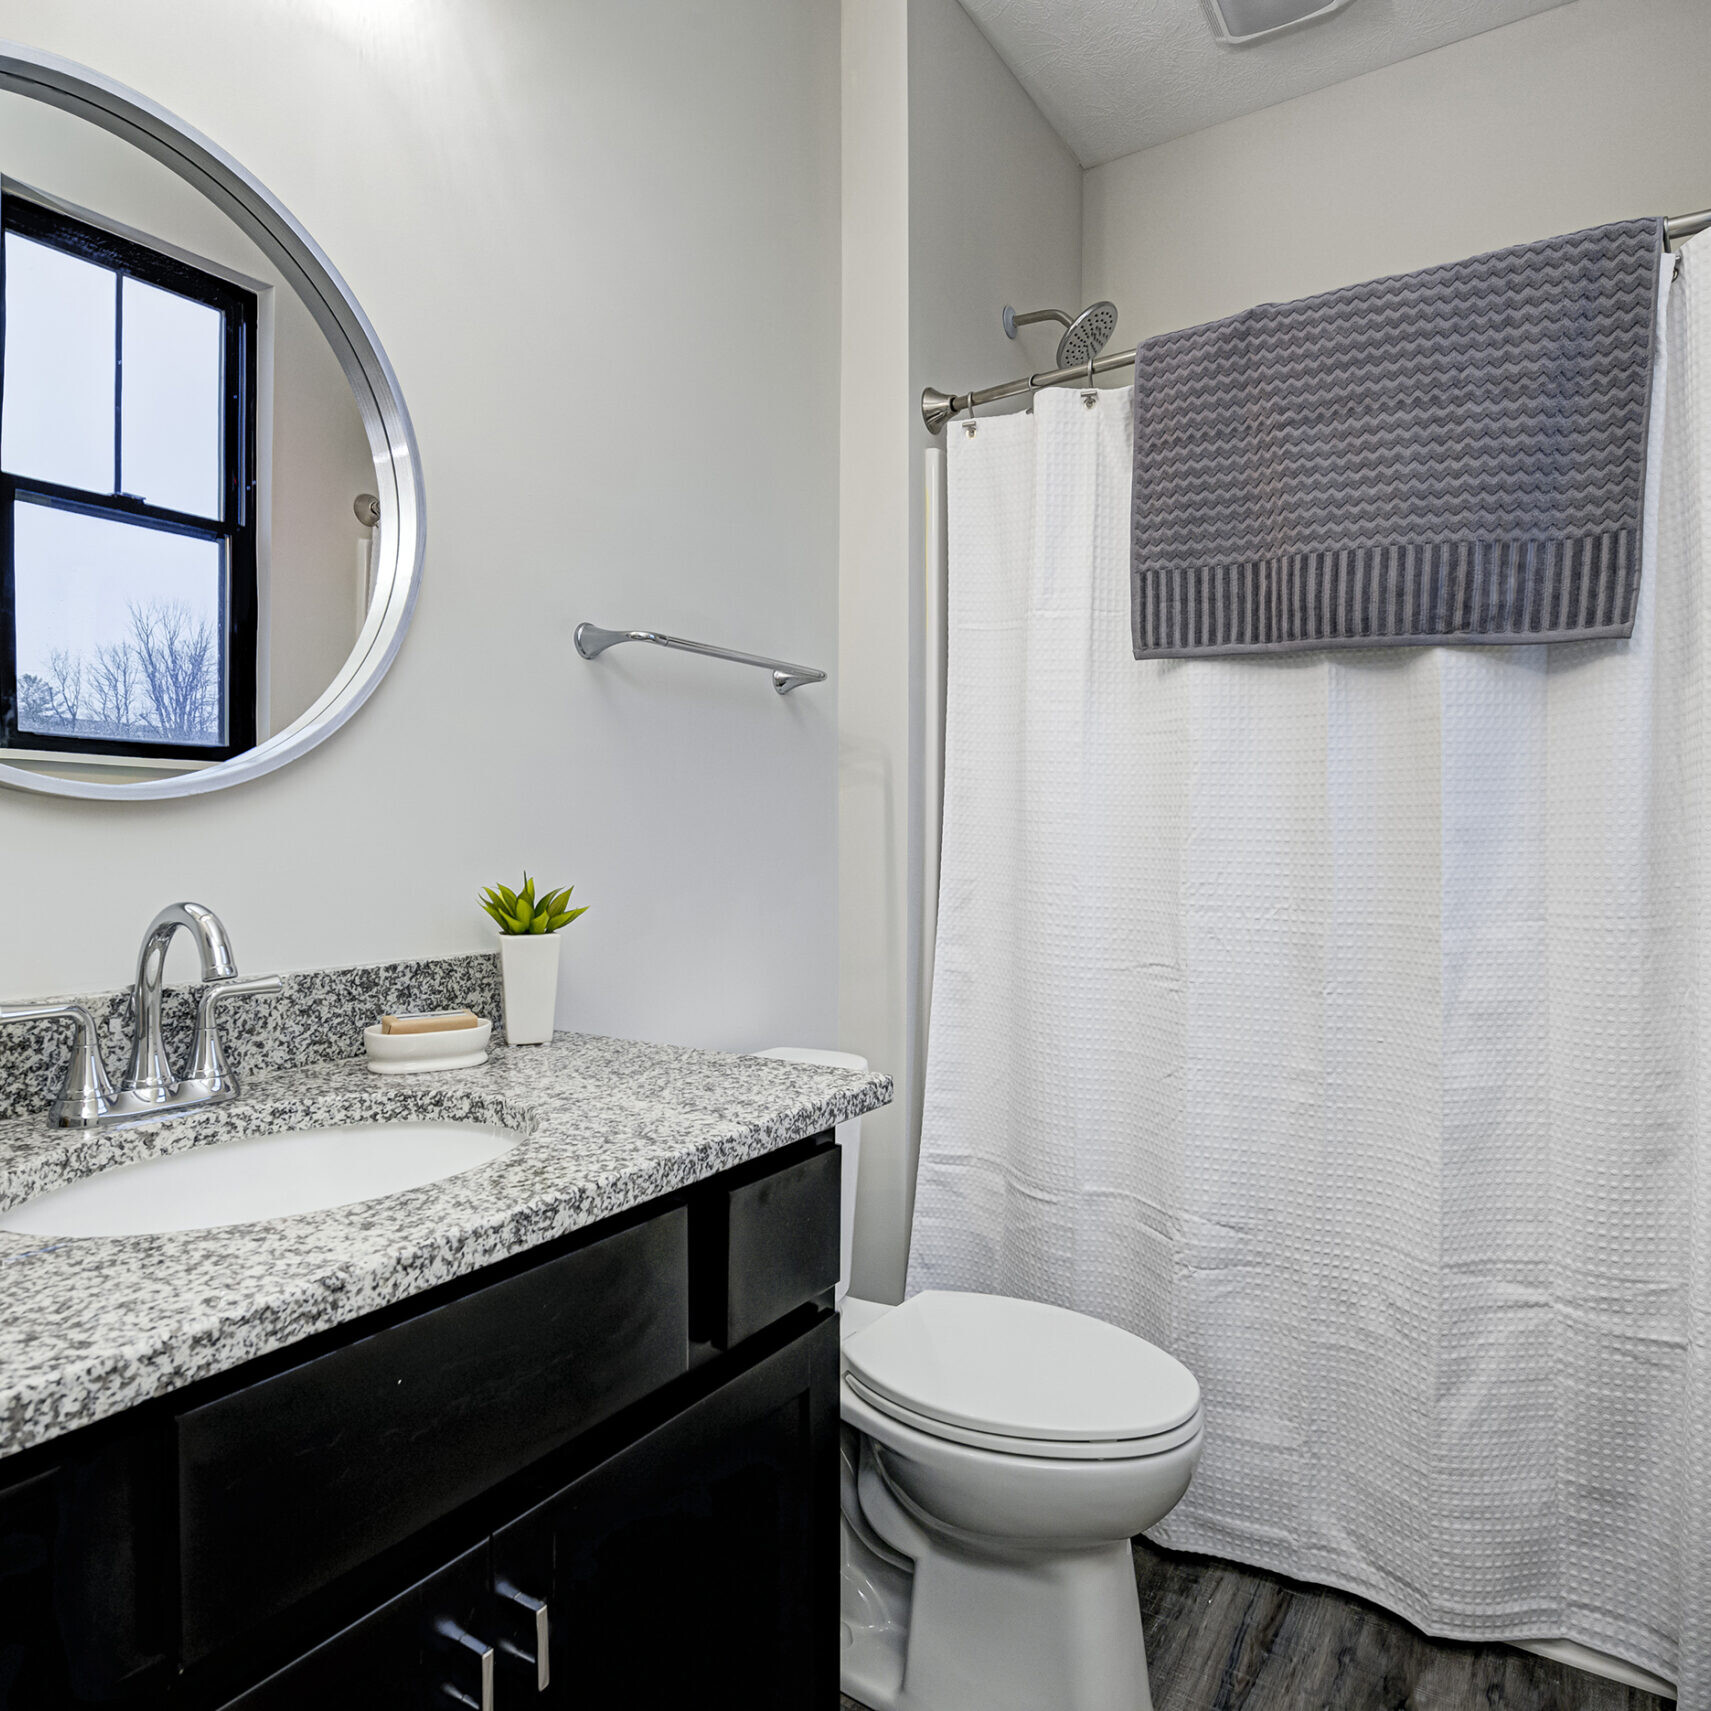 A custom bathroom with a black shower curtain and granite counter top.